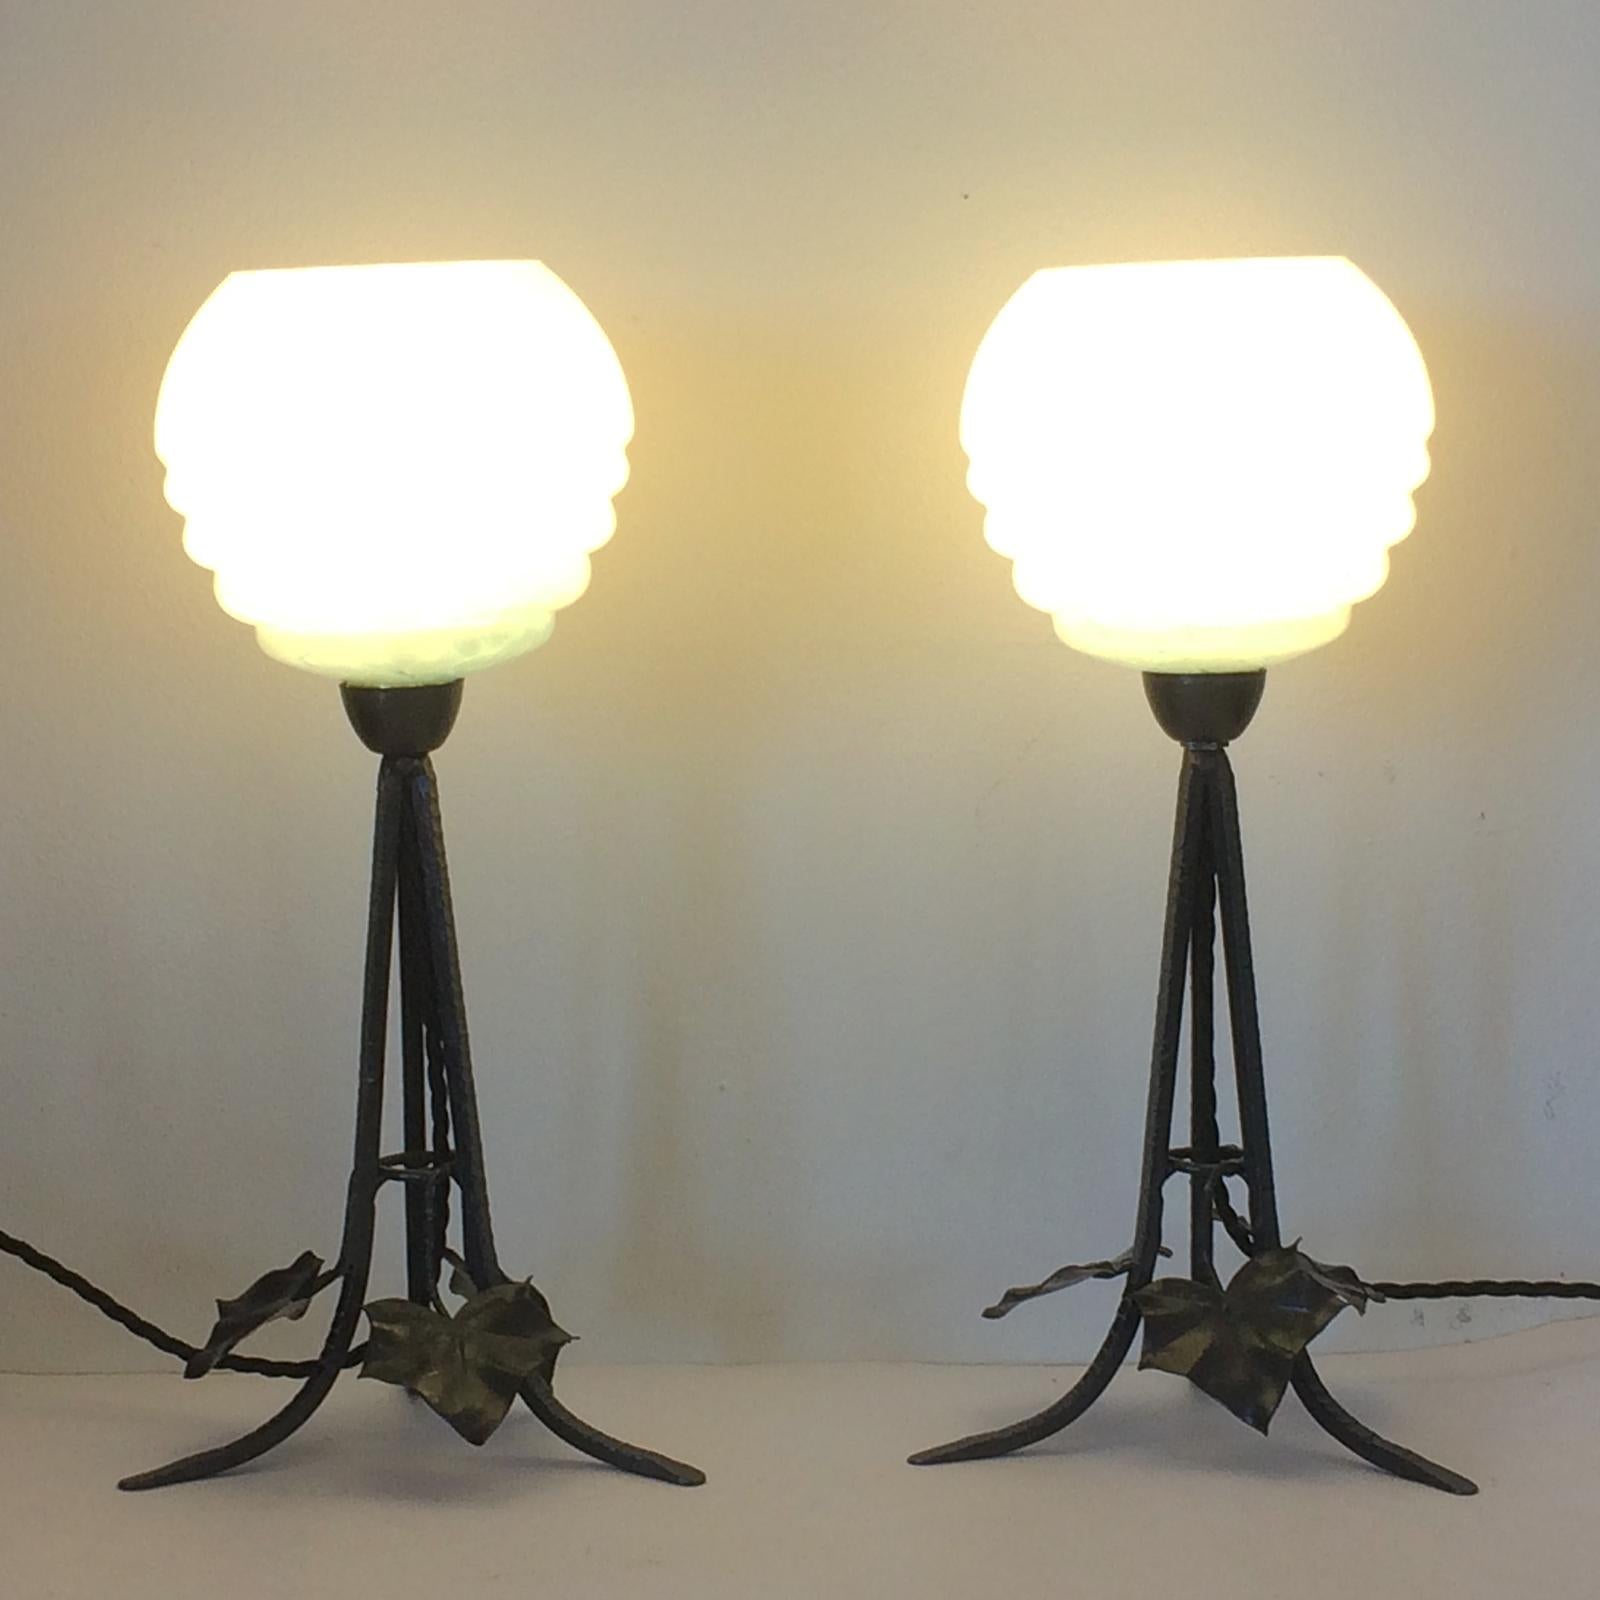 Art Deco pair lamps original “Blue Sky Clouds”, symmetrical, stepped shades with hand-wrought iron bases with ivy leaves and three, cross hammered vertical supports with slayed feet to each. Both in perfect original condition, no damage and no